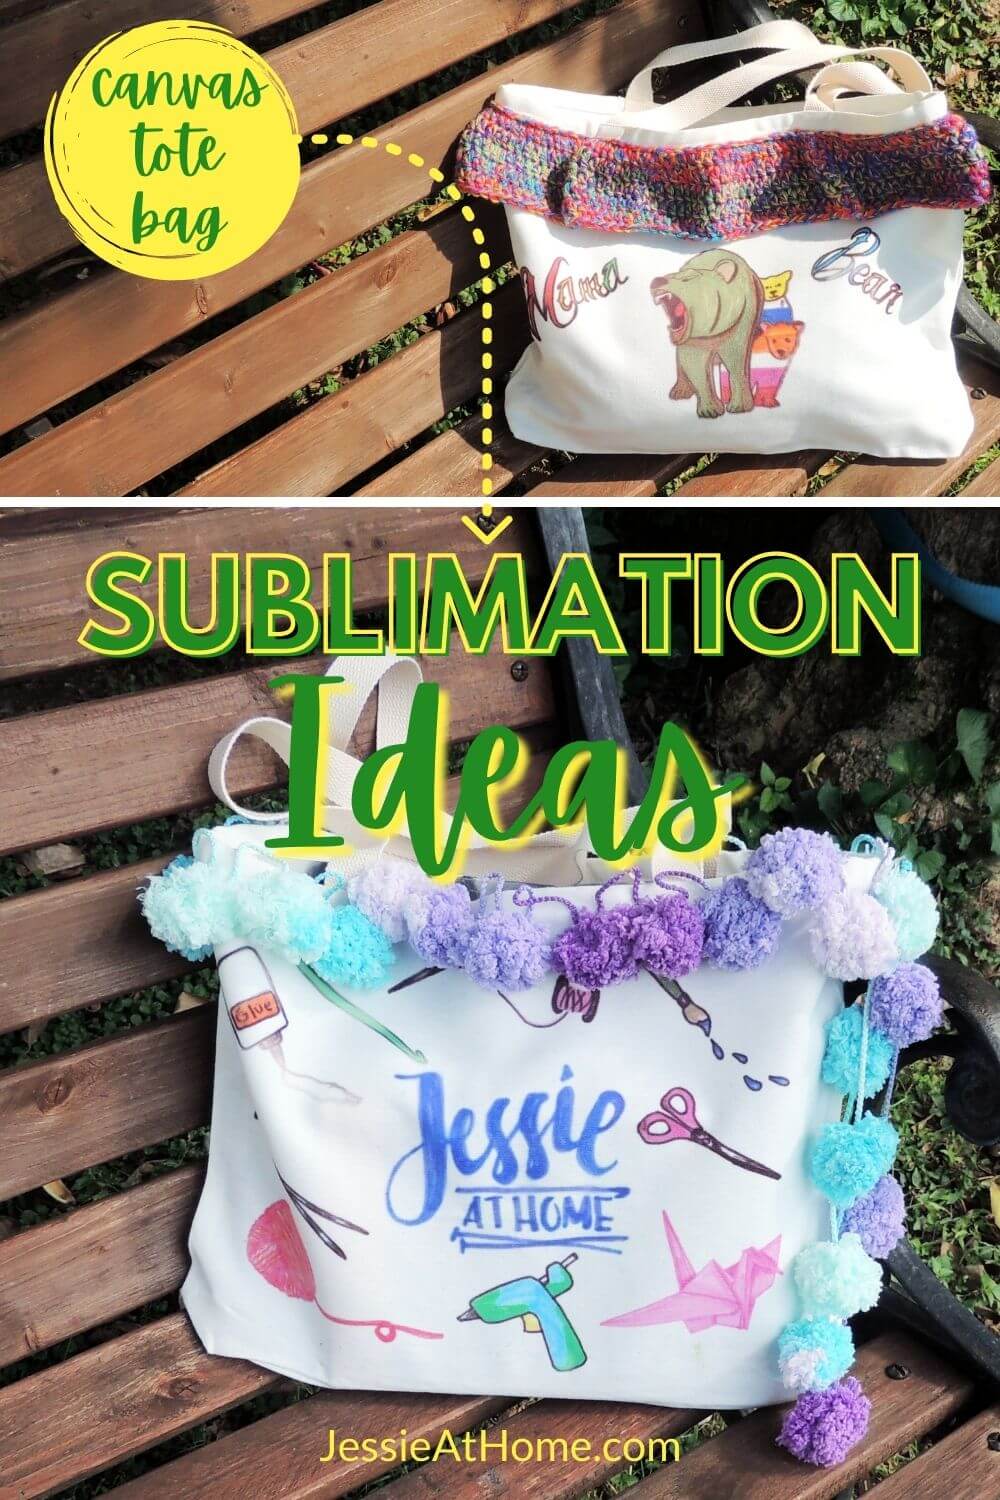 Canvas Tote Bag Design DIY – Make It Spectacular and Yours